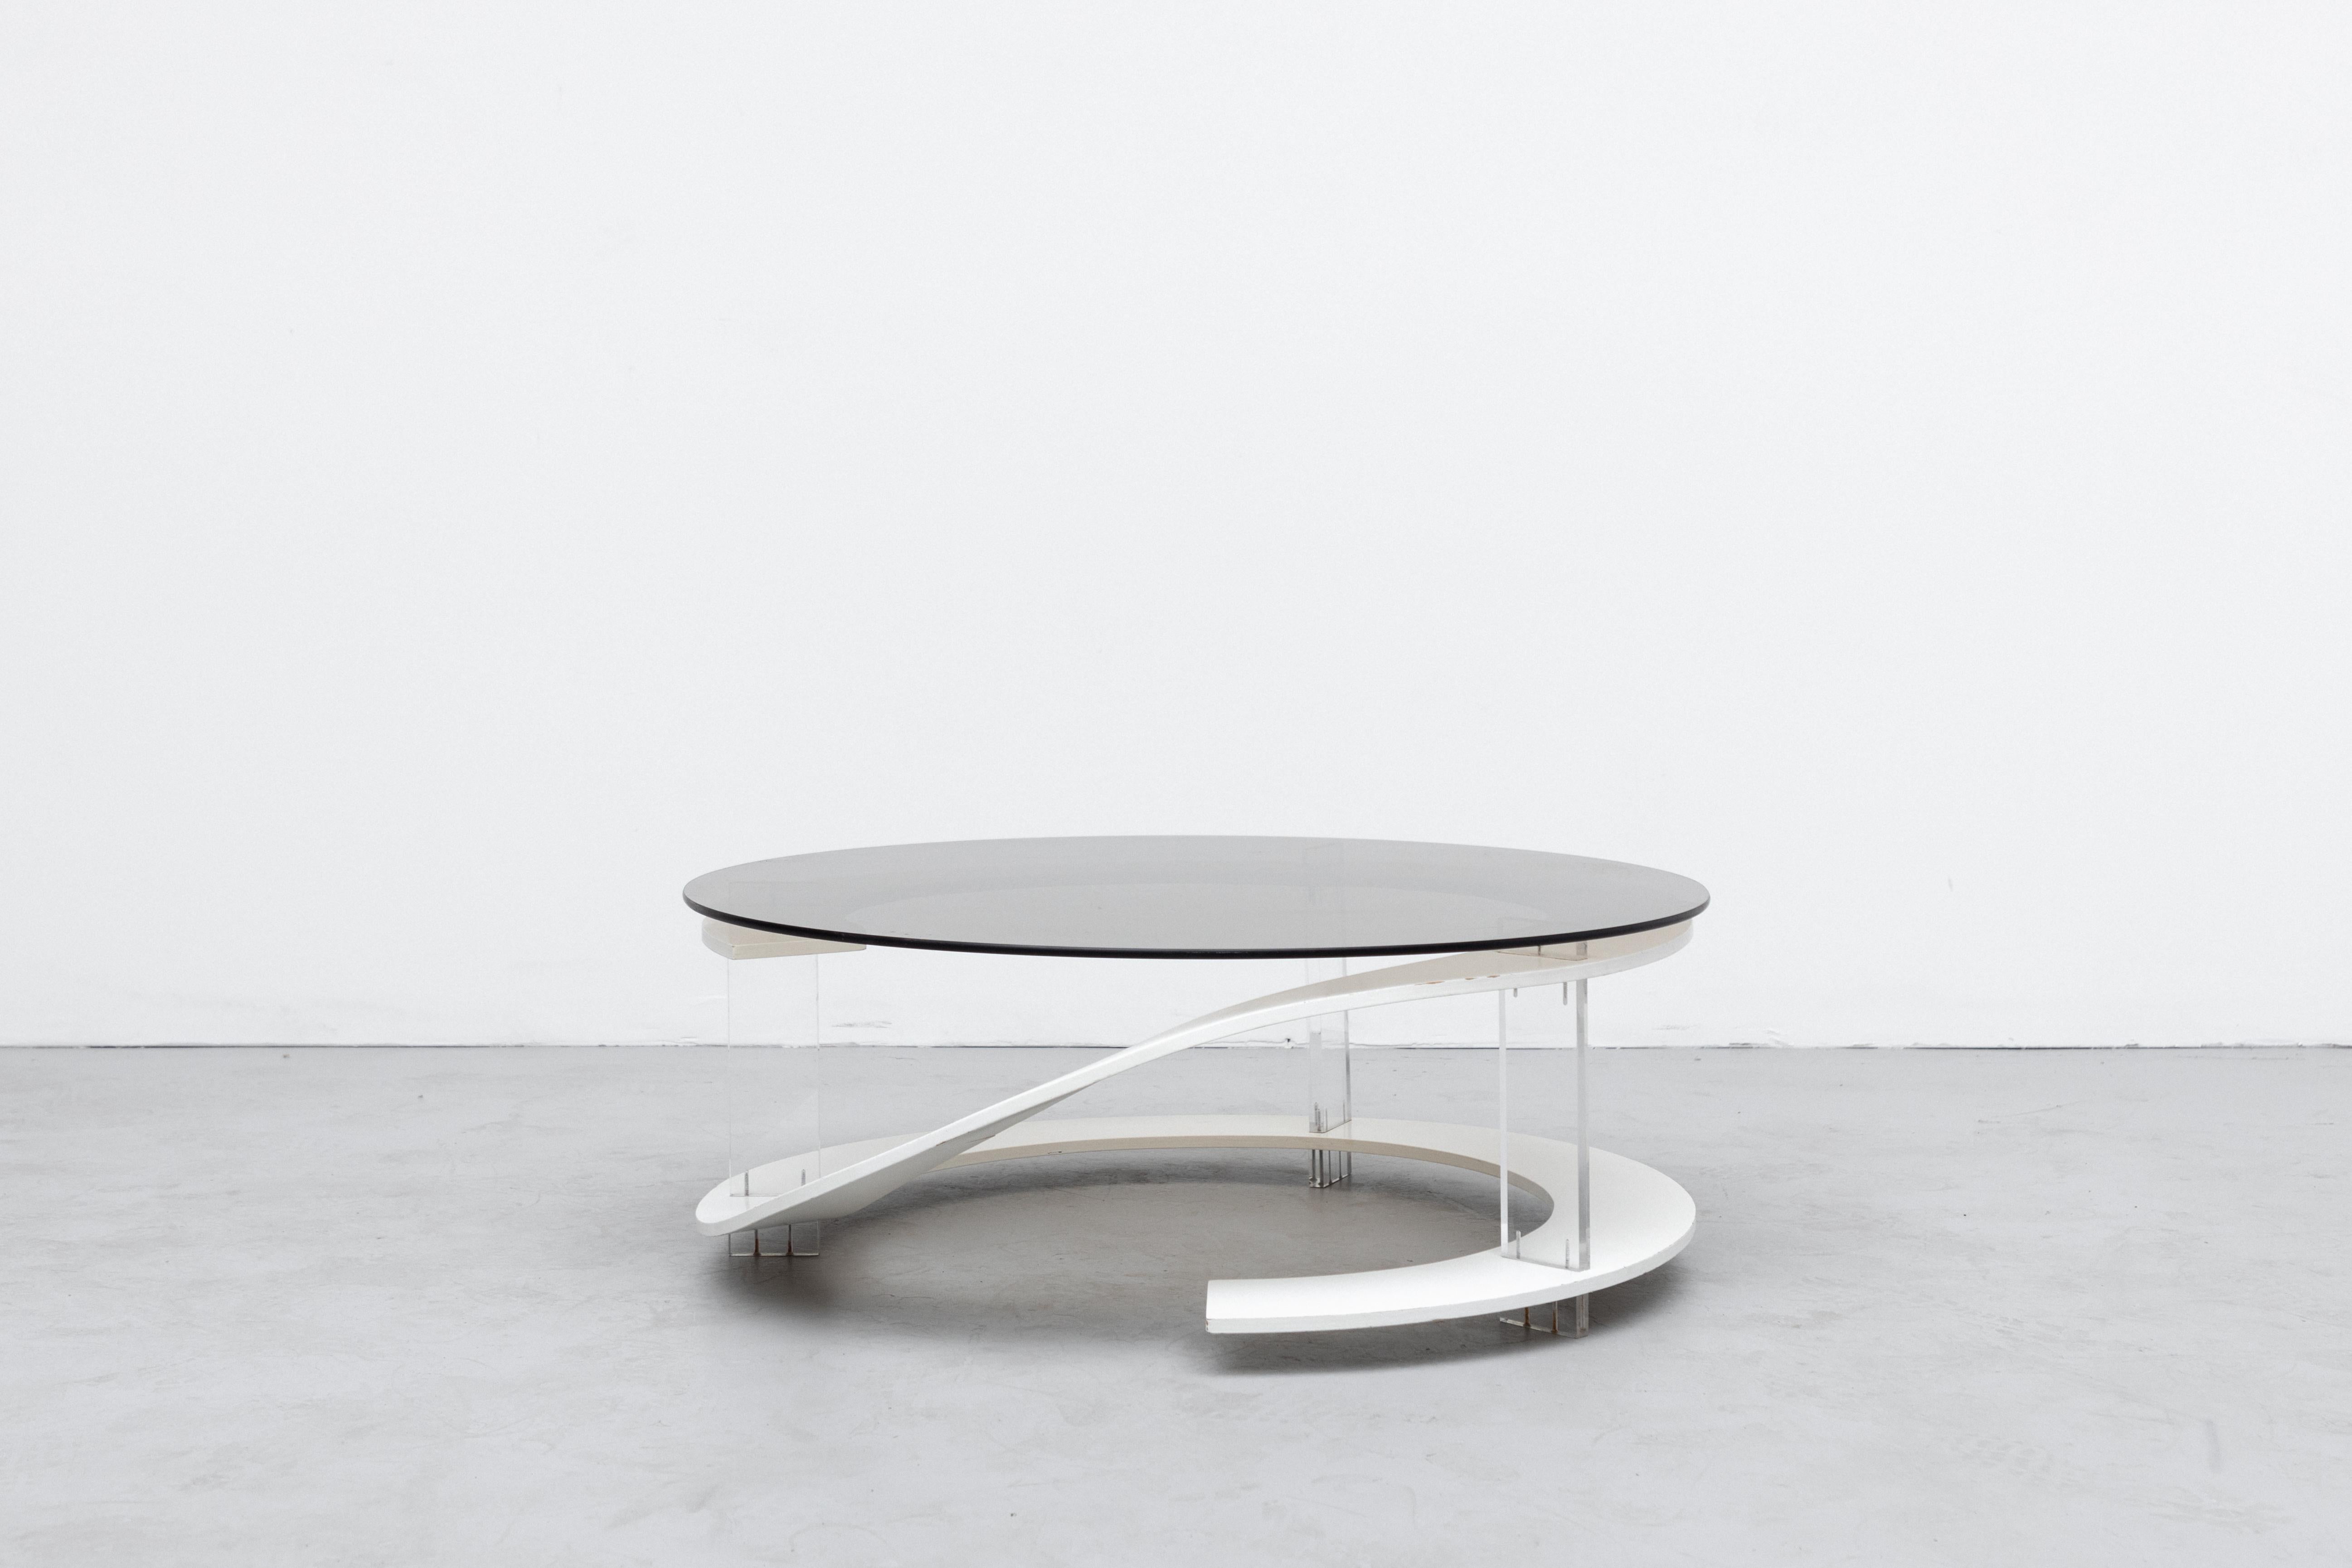 Incredible Space age coffee table with smoked glass top and white stained wood spiral with acrylic supports. unique and stylish design in original condition with some visible scratching to glass and frame. Wear is consistent with age and use.